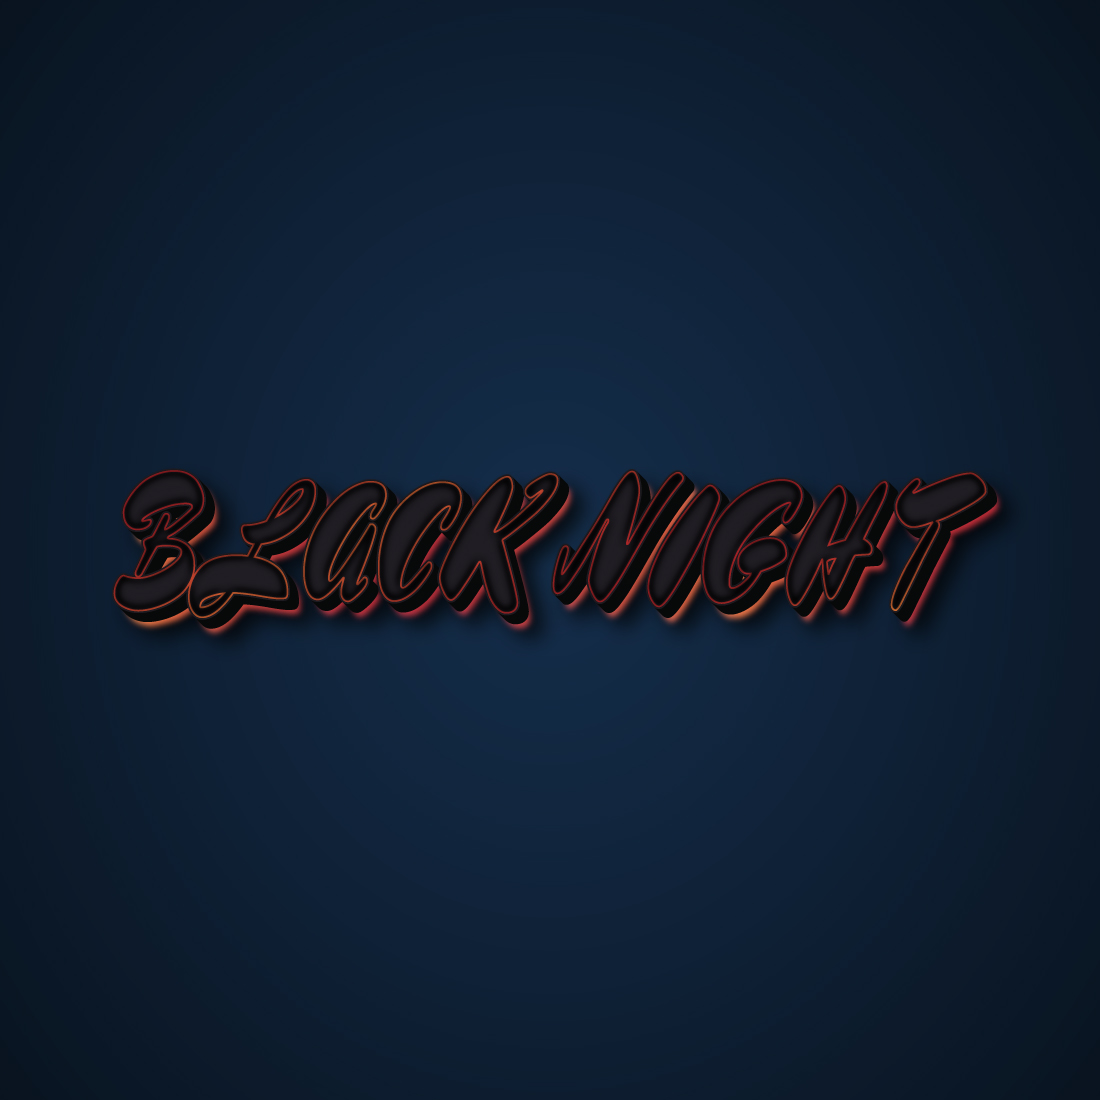 BLACK NIGHT text effect,3d text effect, text effect, 3d text, typography design, editable text effect, preview image.